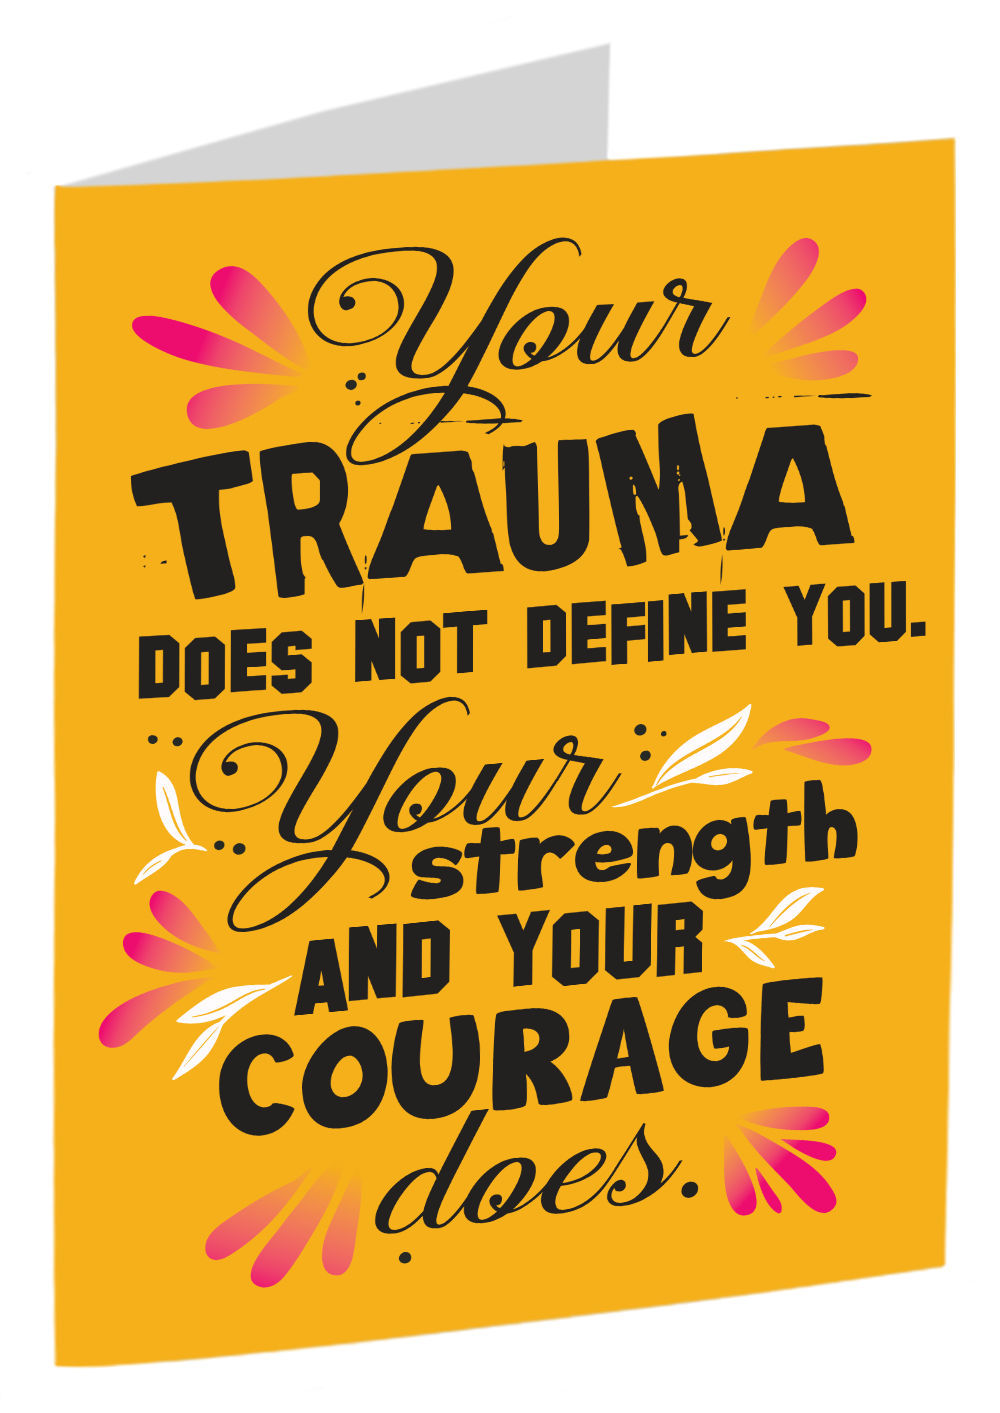 TRAUMA QUOTES: "Your trauma does not define you - your strength and your courage does"